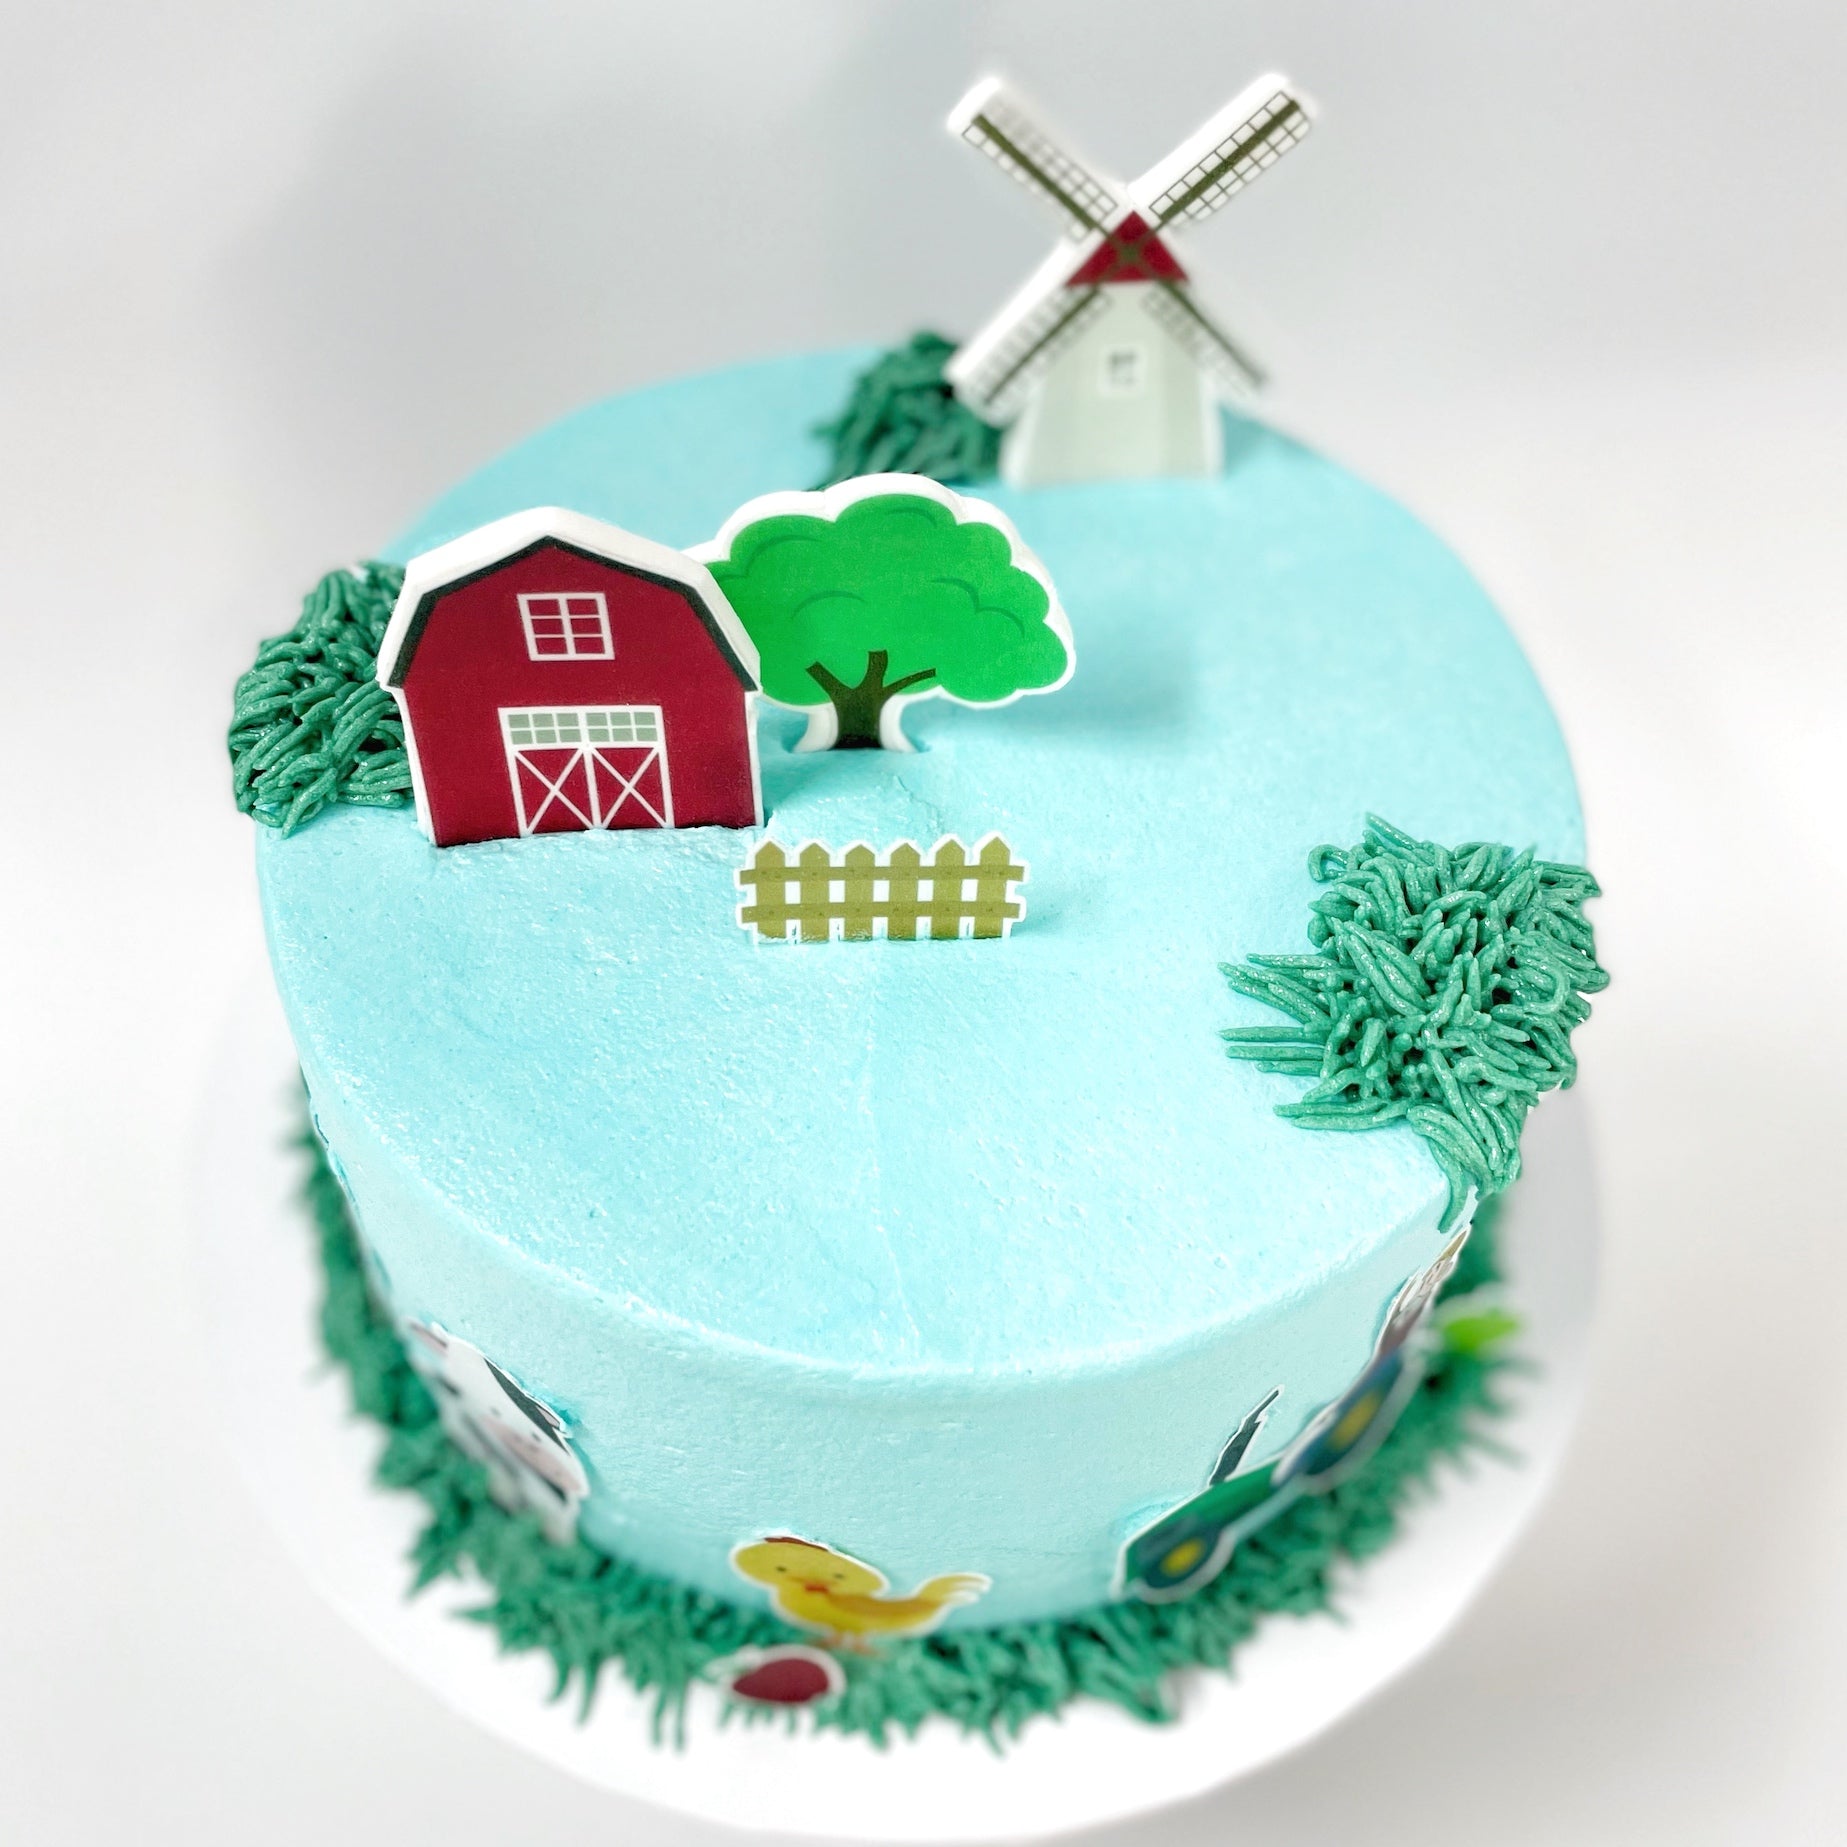 Farm animal cake - Decorated Cake by OfF ThE CuFf CaKeS!! - CakesDecor